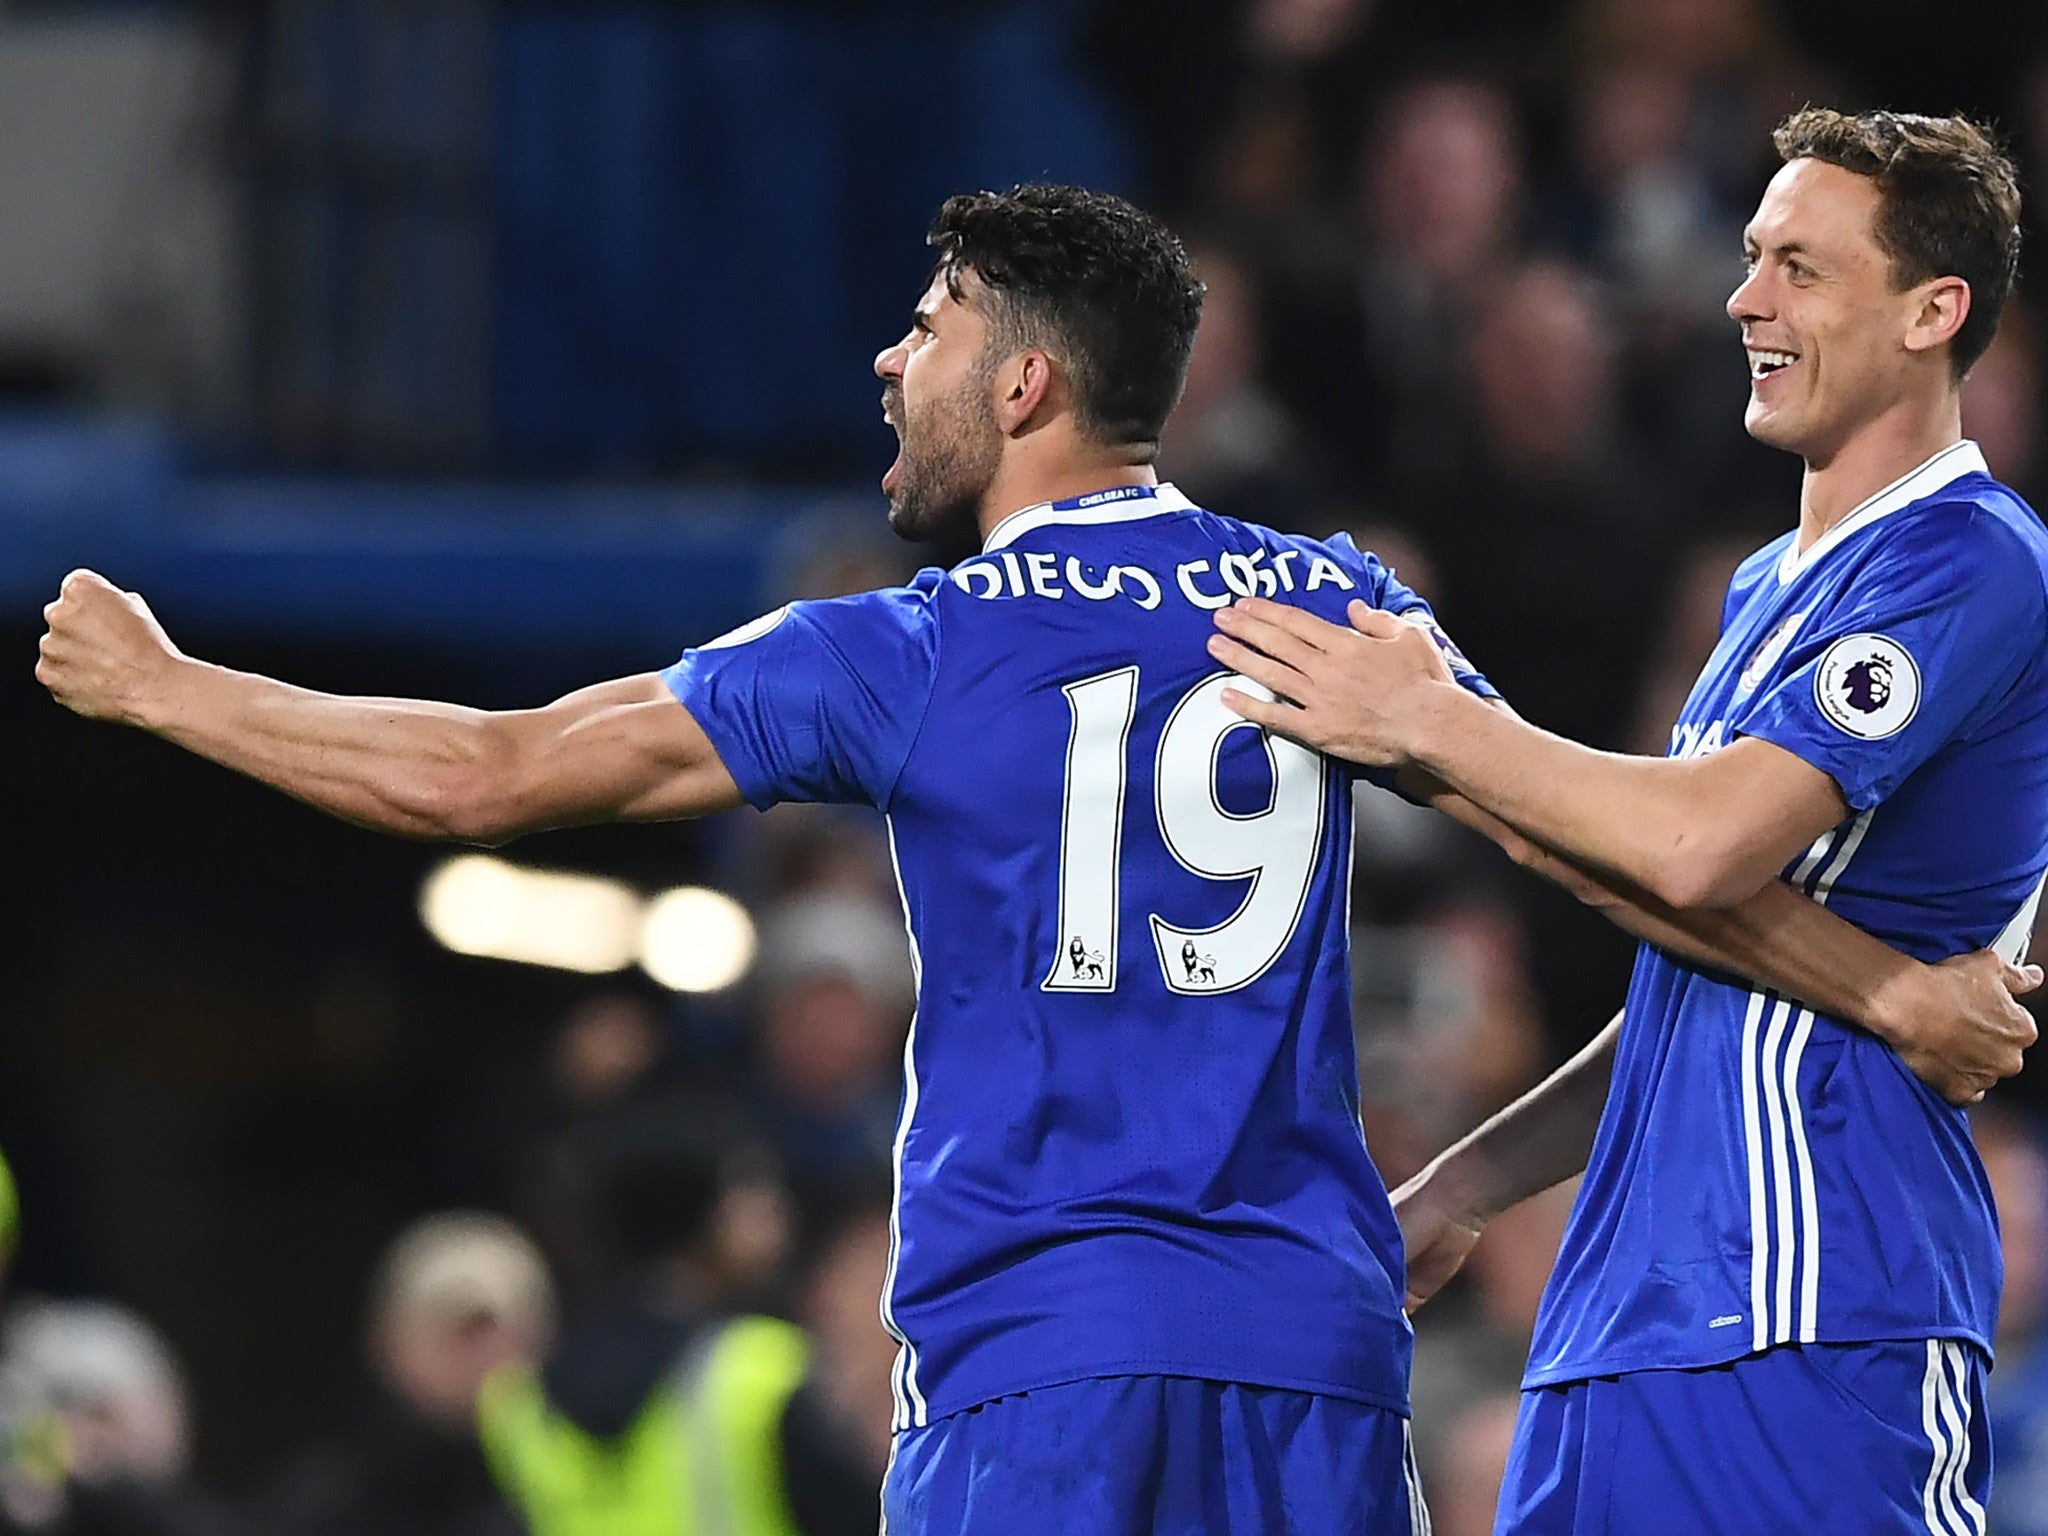 Diego Costa scored twice in the second half to secure all three points for the hosts